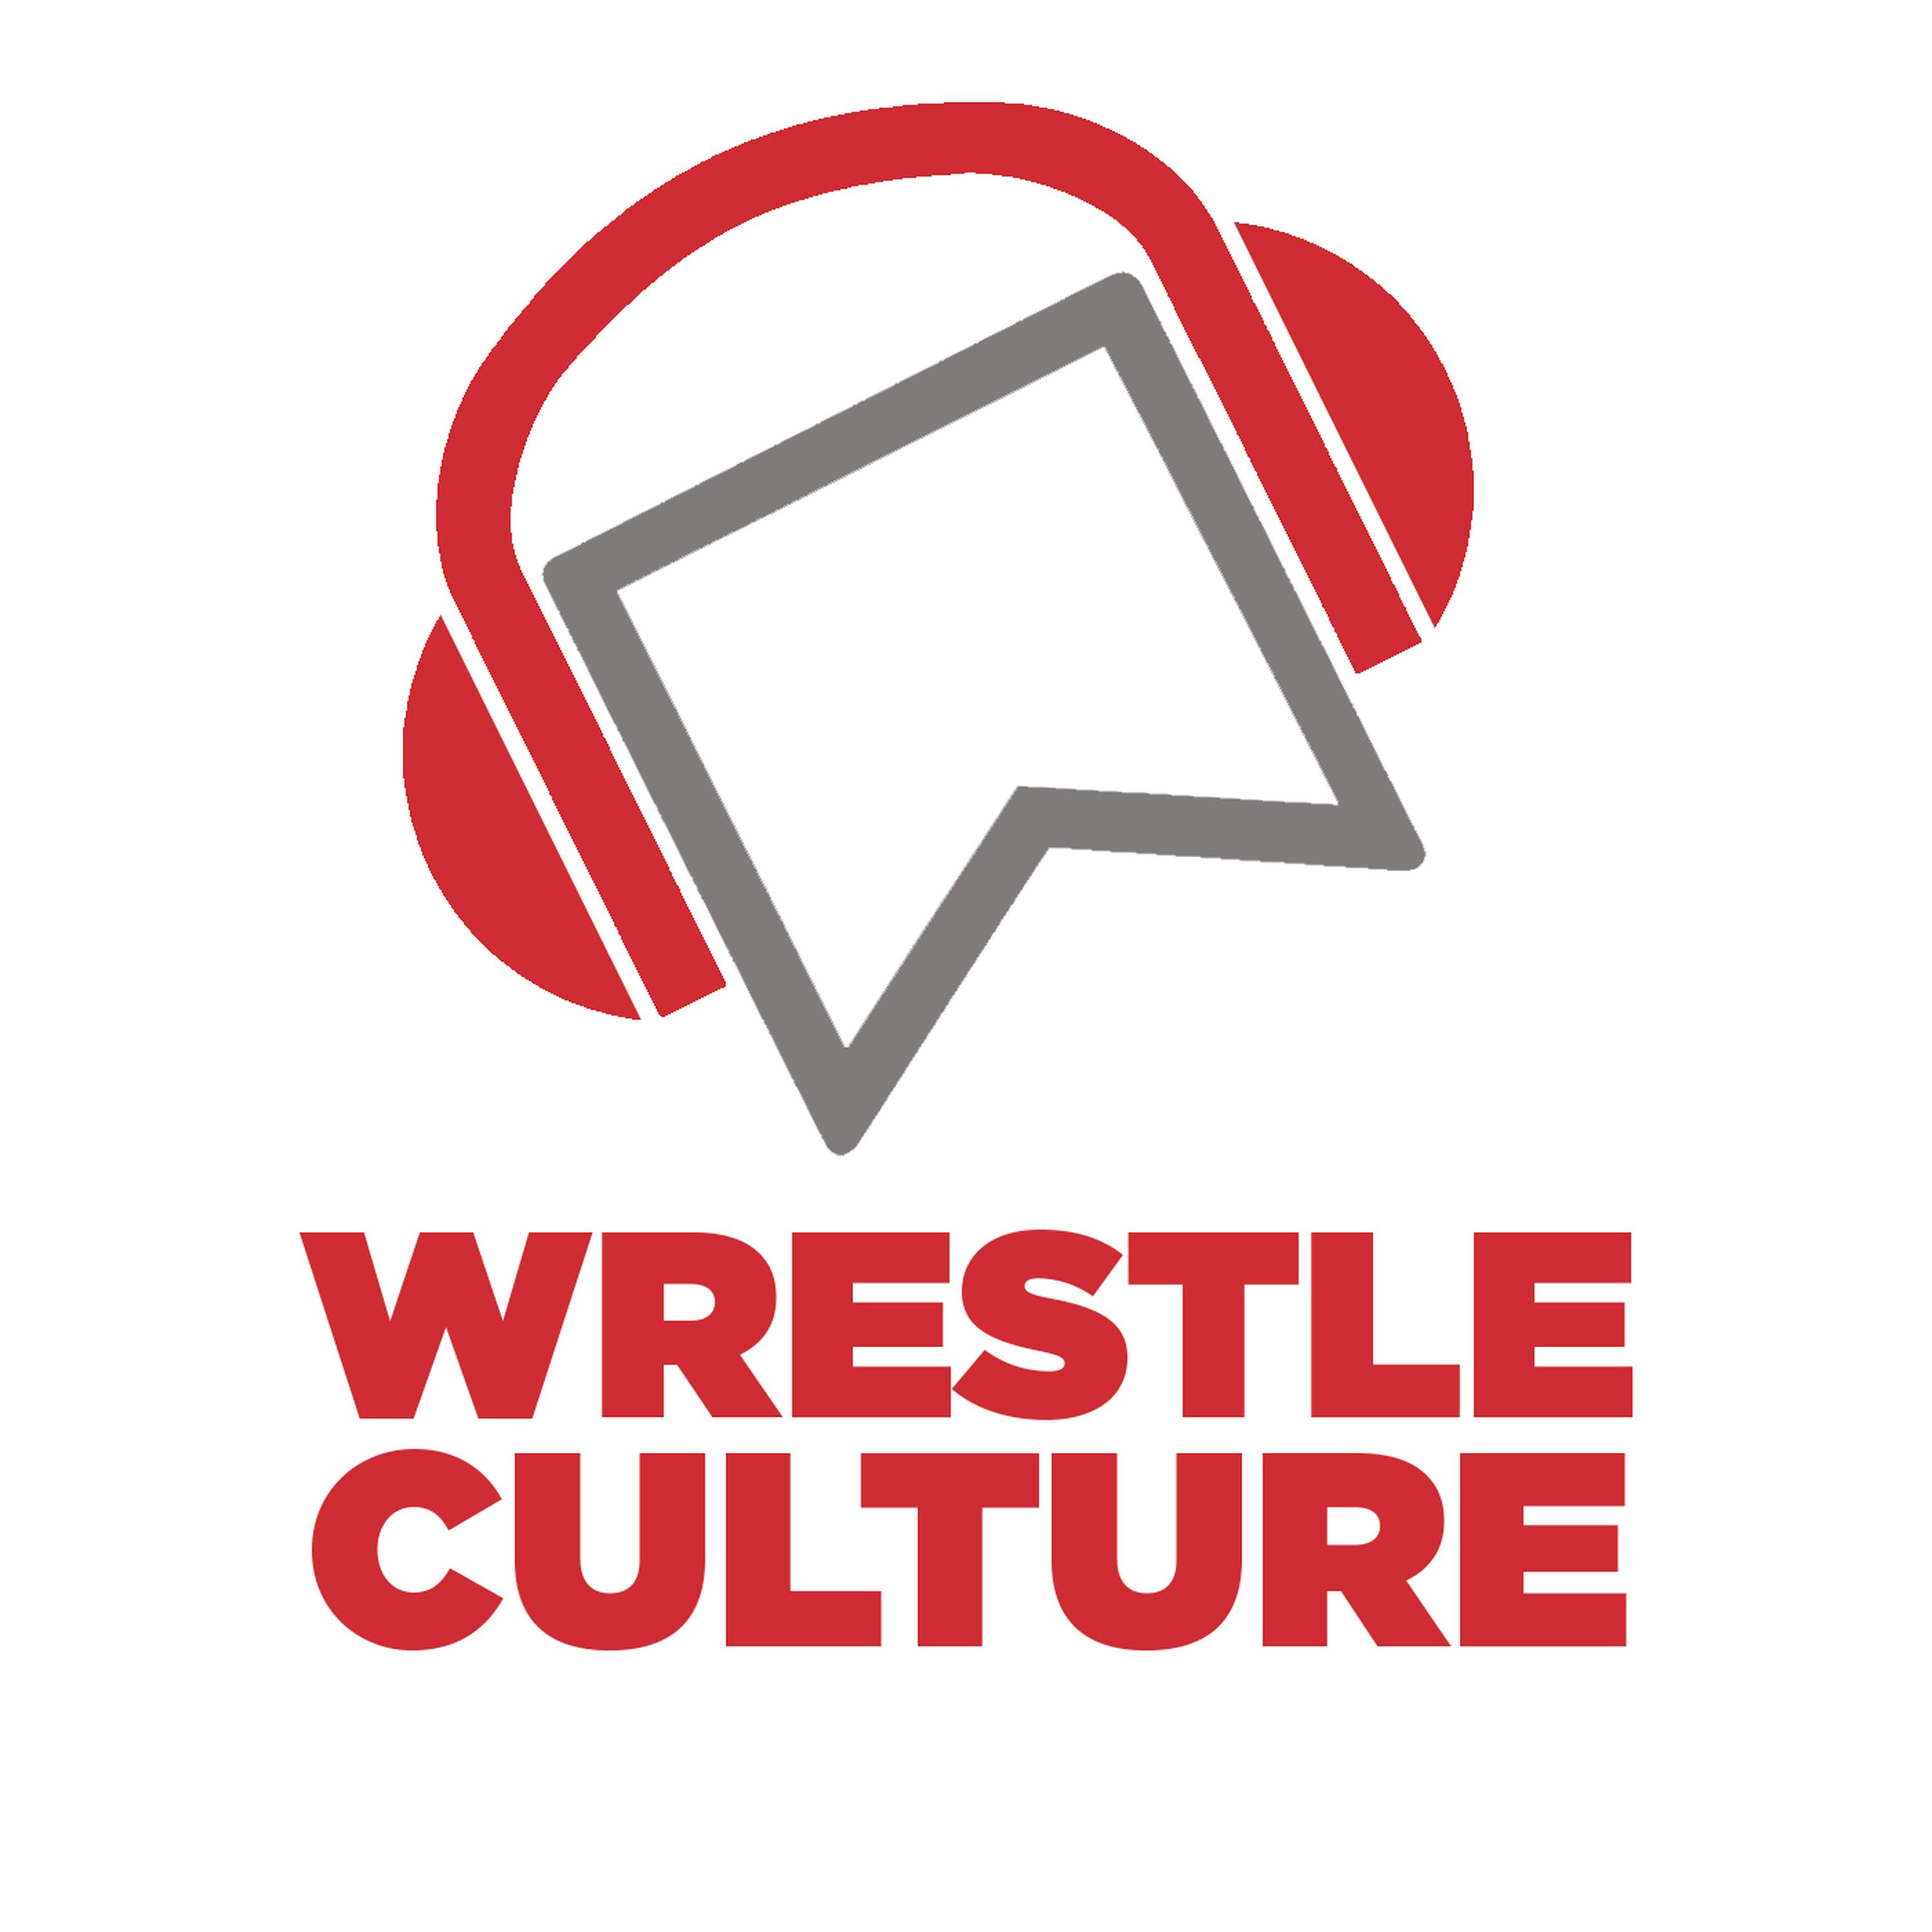 WrestleCulture - Crown Jewel REVIEW! The Road To Survivor Series! Braun Strowman To Impact? The Undertaker Introduces Pitbull?!